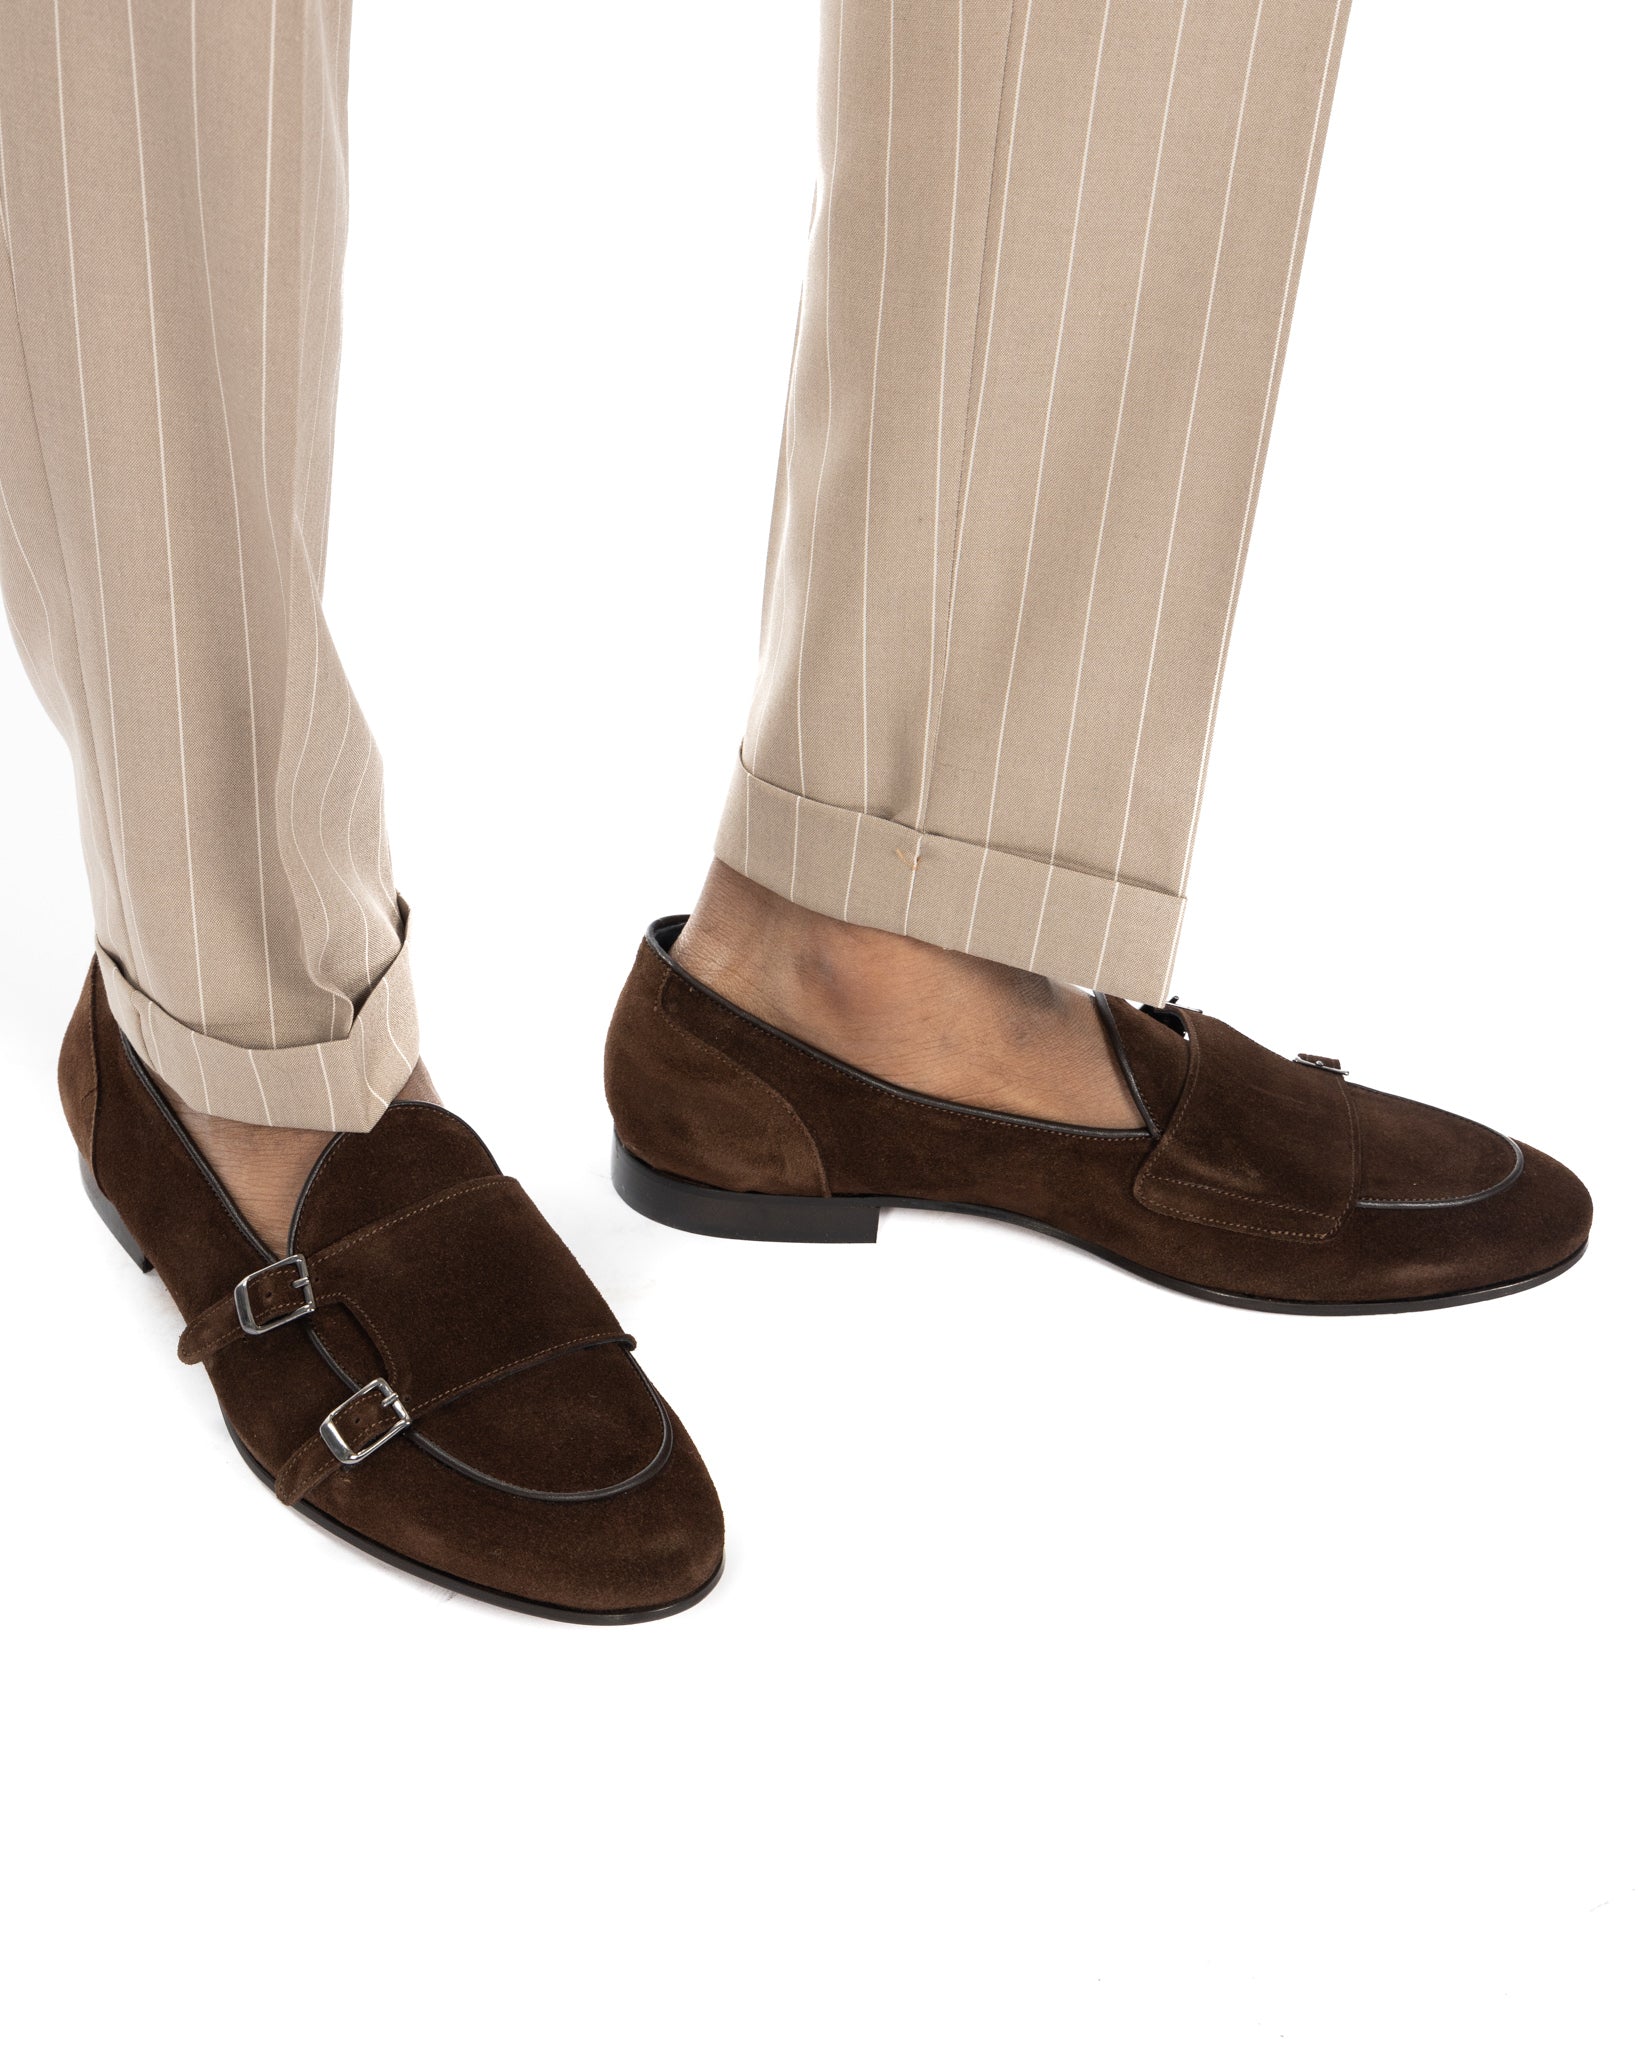 Gianni - dark brown suede moccasin with double buckle